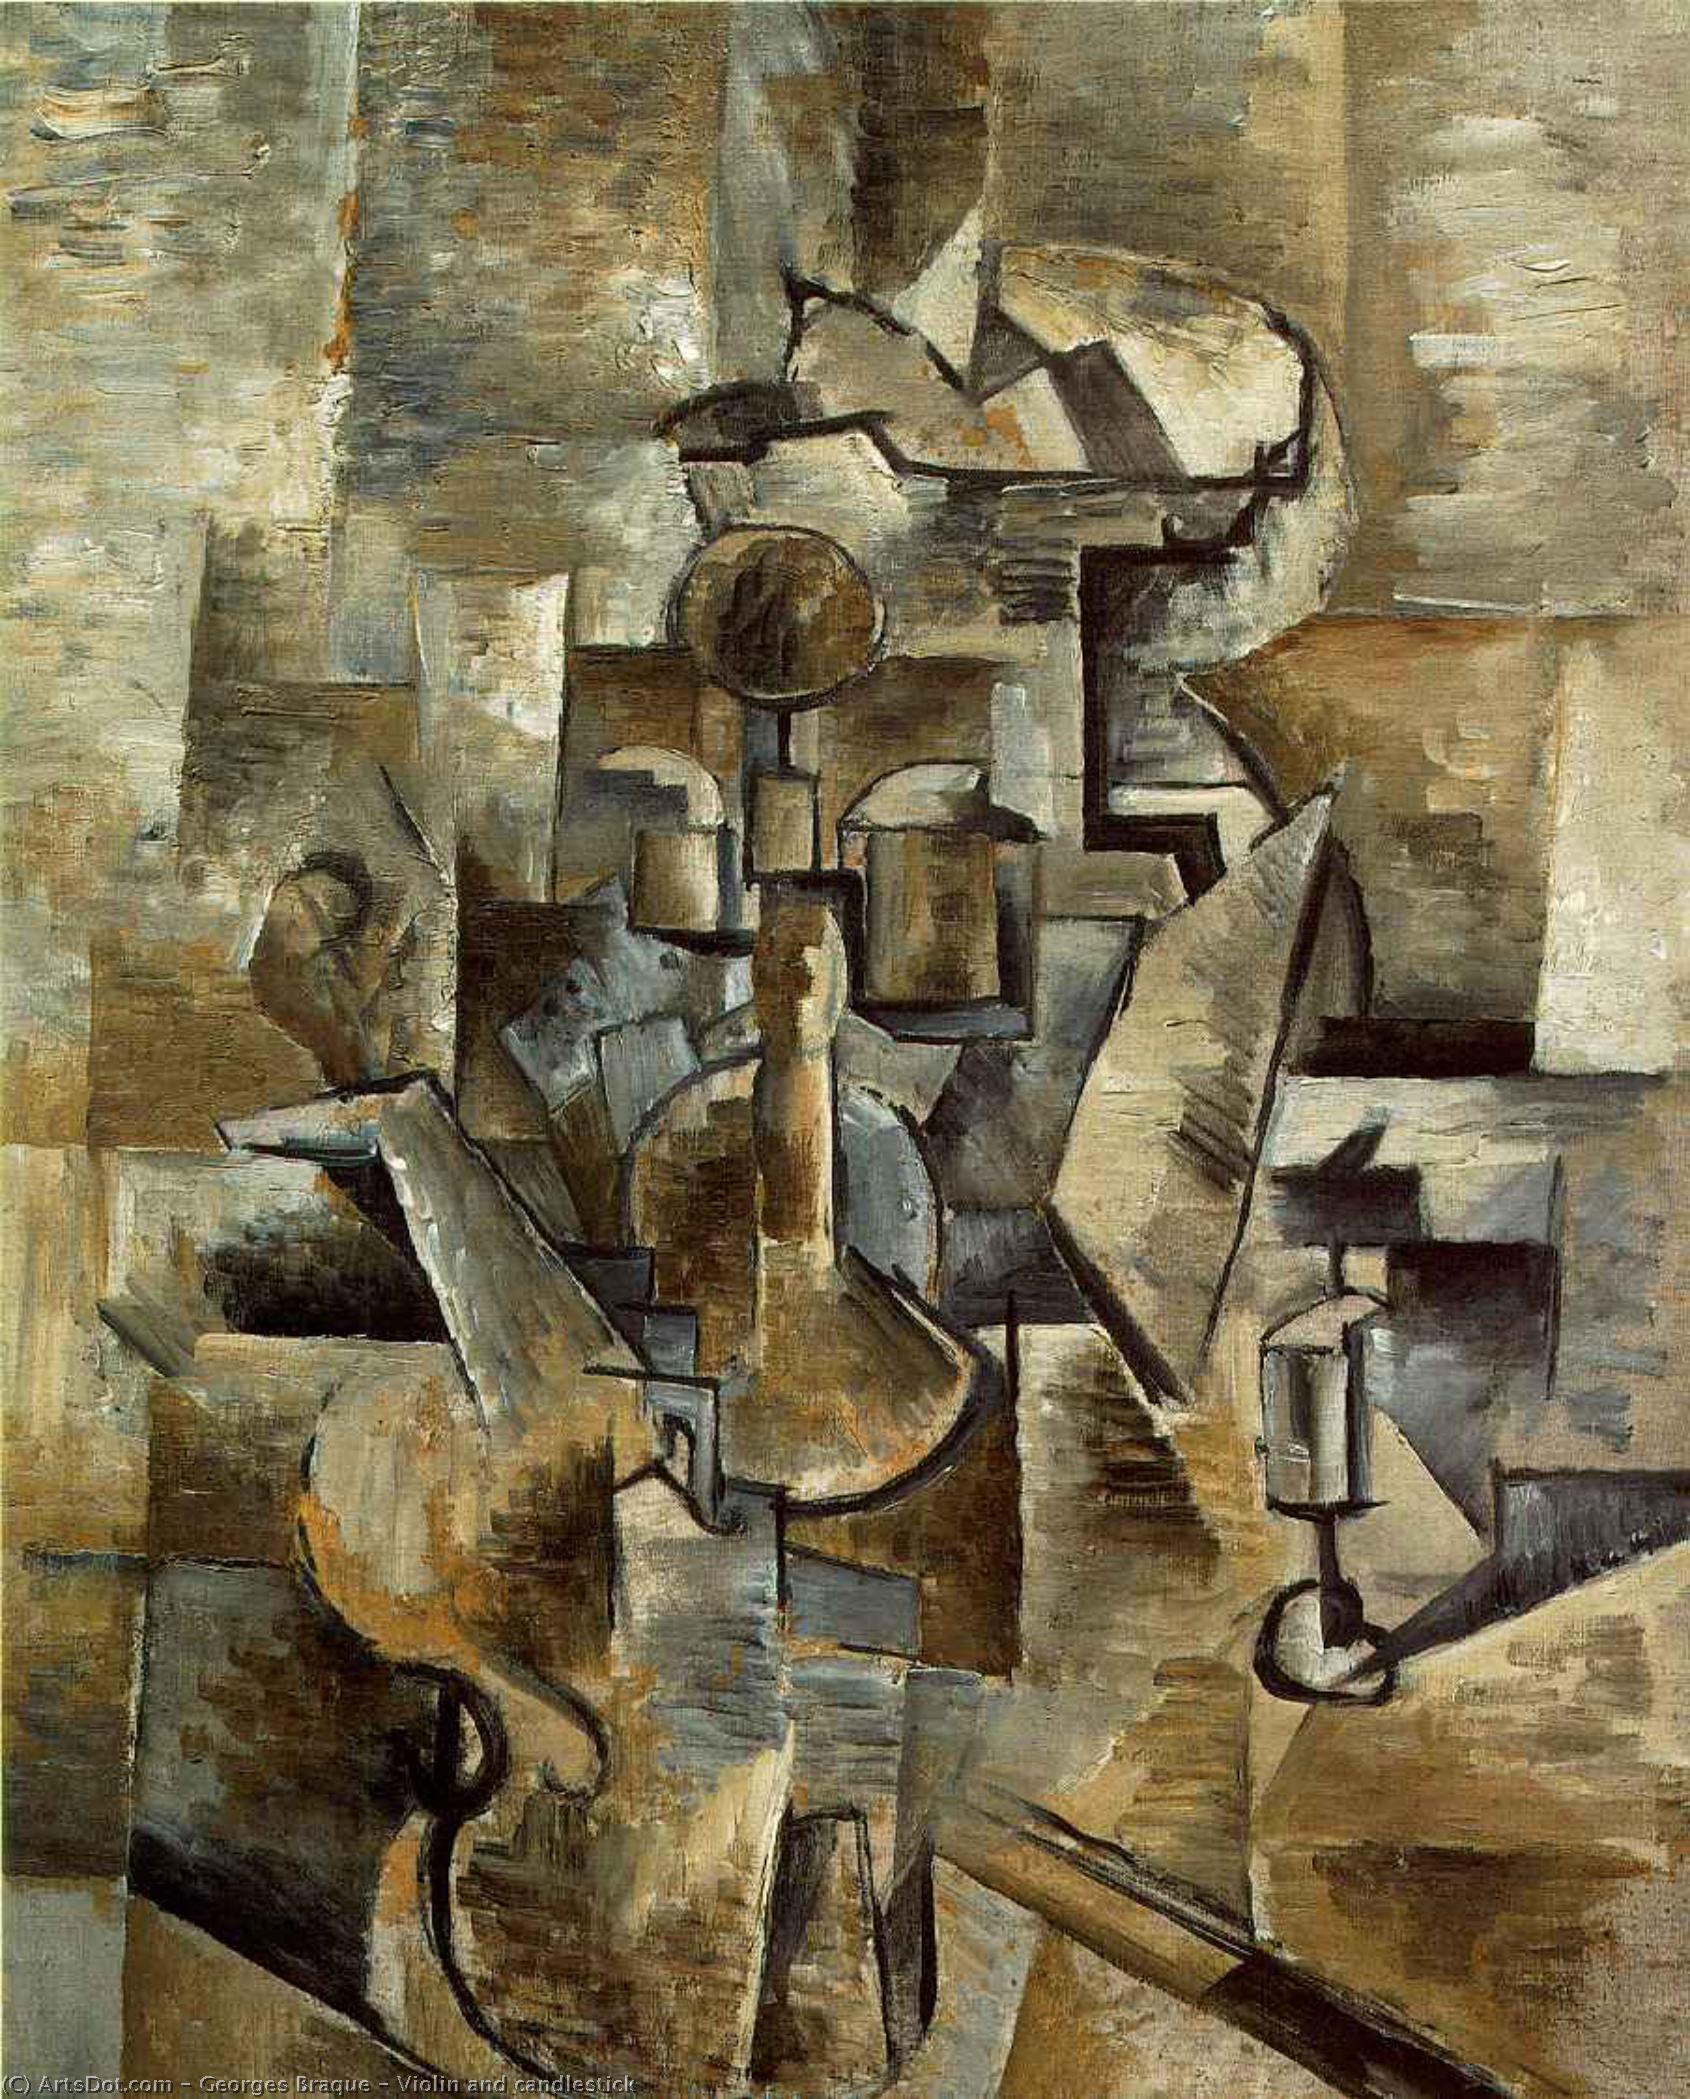 WikiOO.org - 백과 사전 - 회화, 삽화 Georges Braque - Violin and candlestick